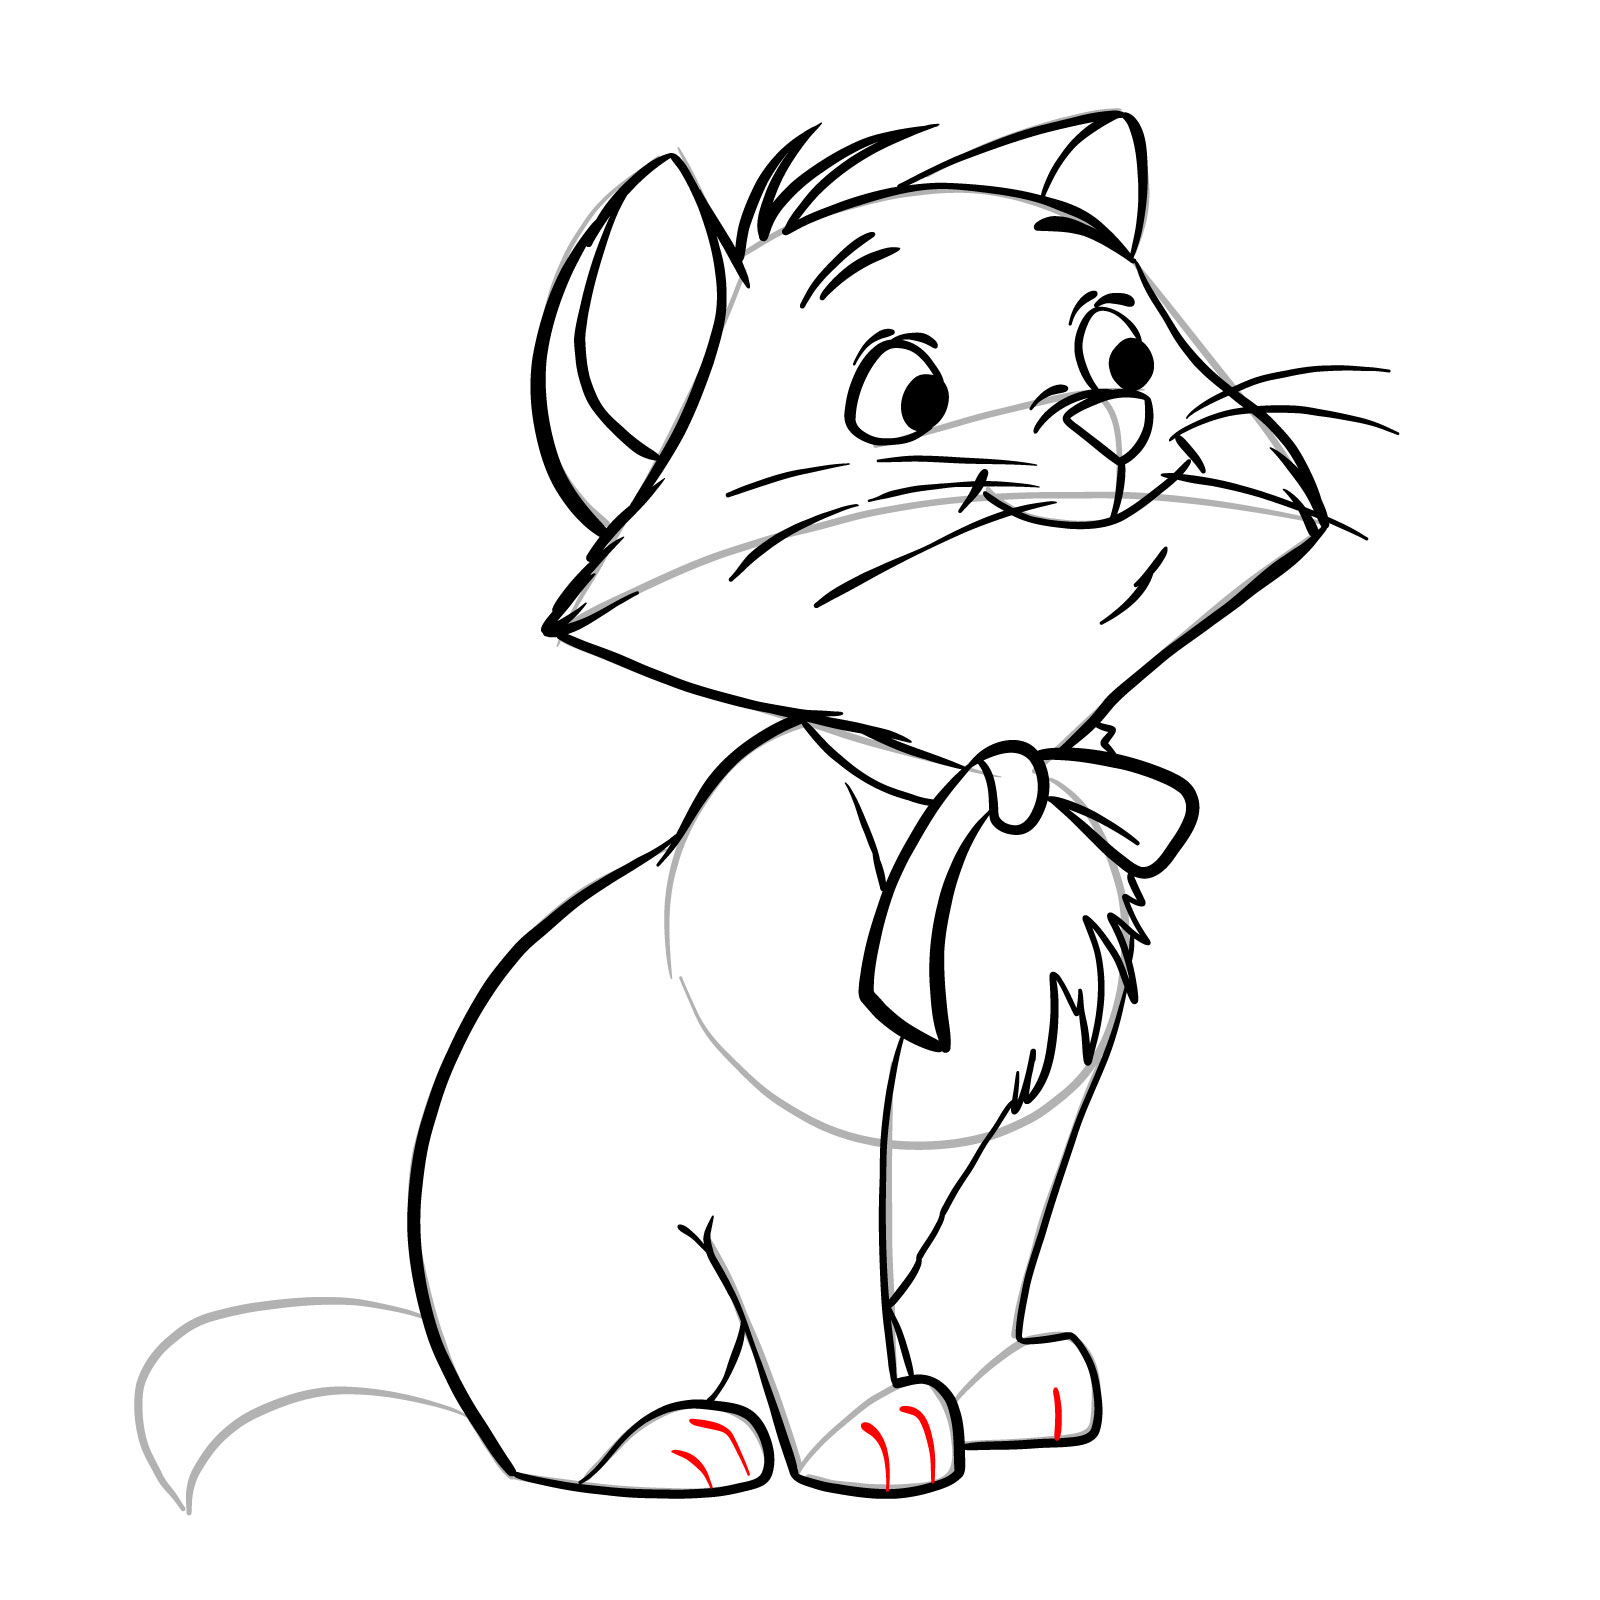 How to draw Berlioz from The Aristocats - step 23